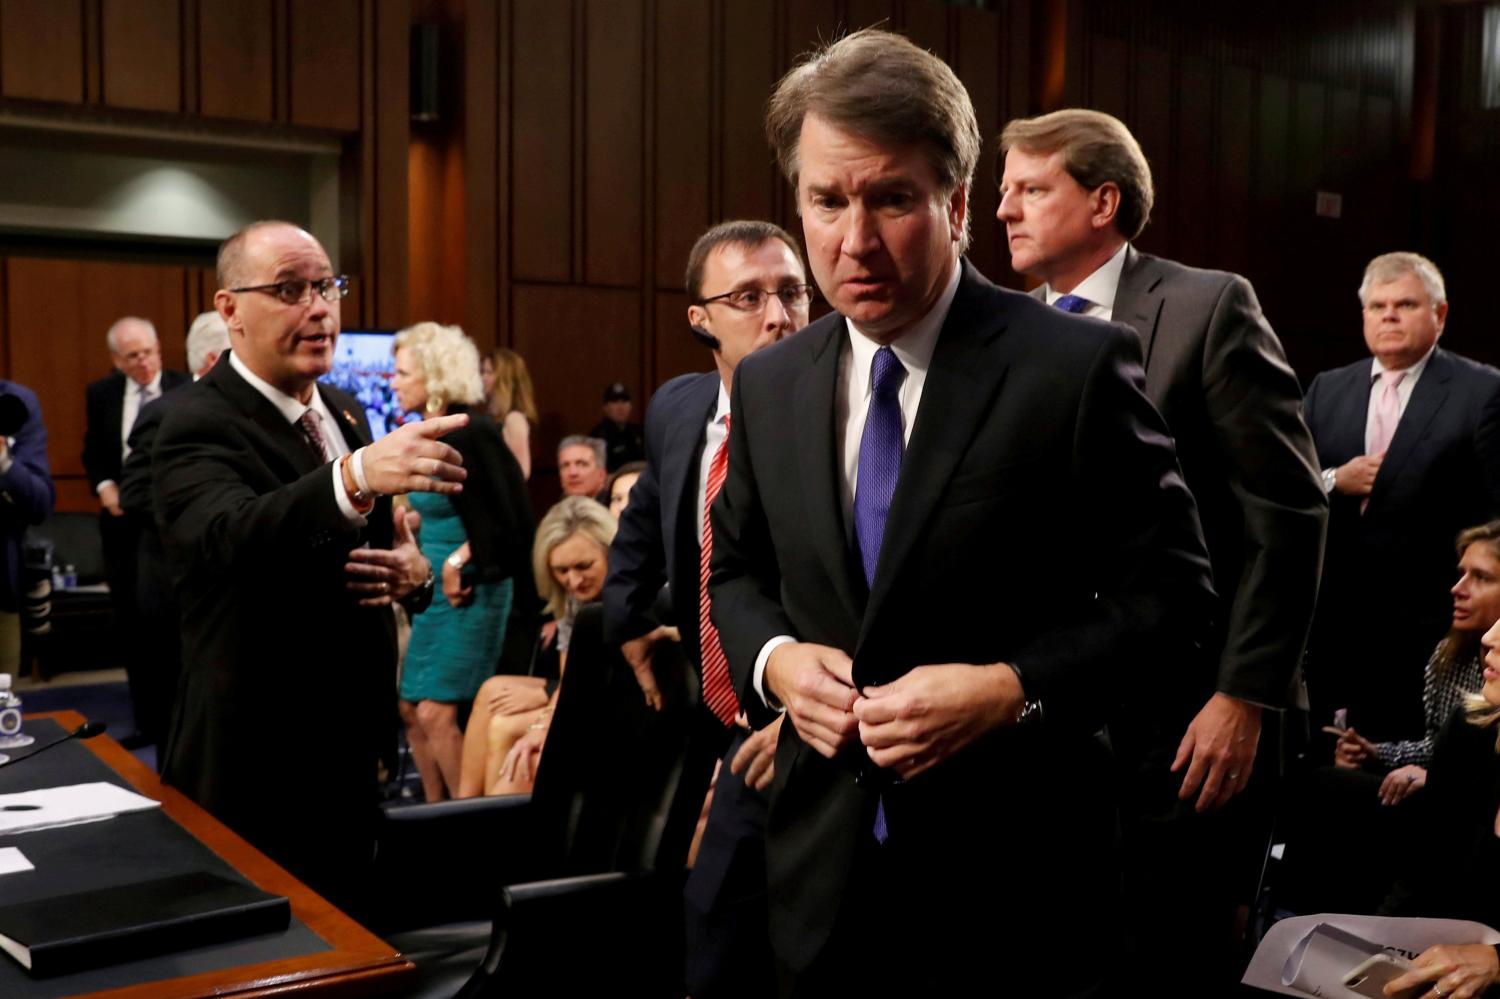 Fred Guttenberg (L), the father of Jaime Guttenberg, a victim of the February 14, 2018 mass shooting in Parkland, Florida, reaches out to try to shake hands with U.S. Supreme Court nominee Judge Brett Kavanaugh during his U.S. Senate Judiciary Committee confirmation hearing on Capitol Hill in Washington, U.S., September 4, 2018. REUTERS/Joshua Roberts      TPX IMAGES OF THE DAY - RC1873BE7E60